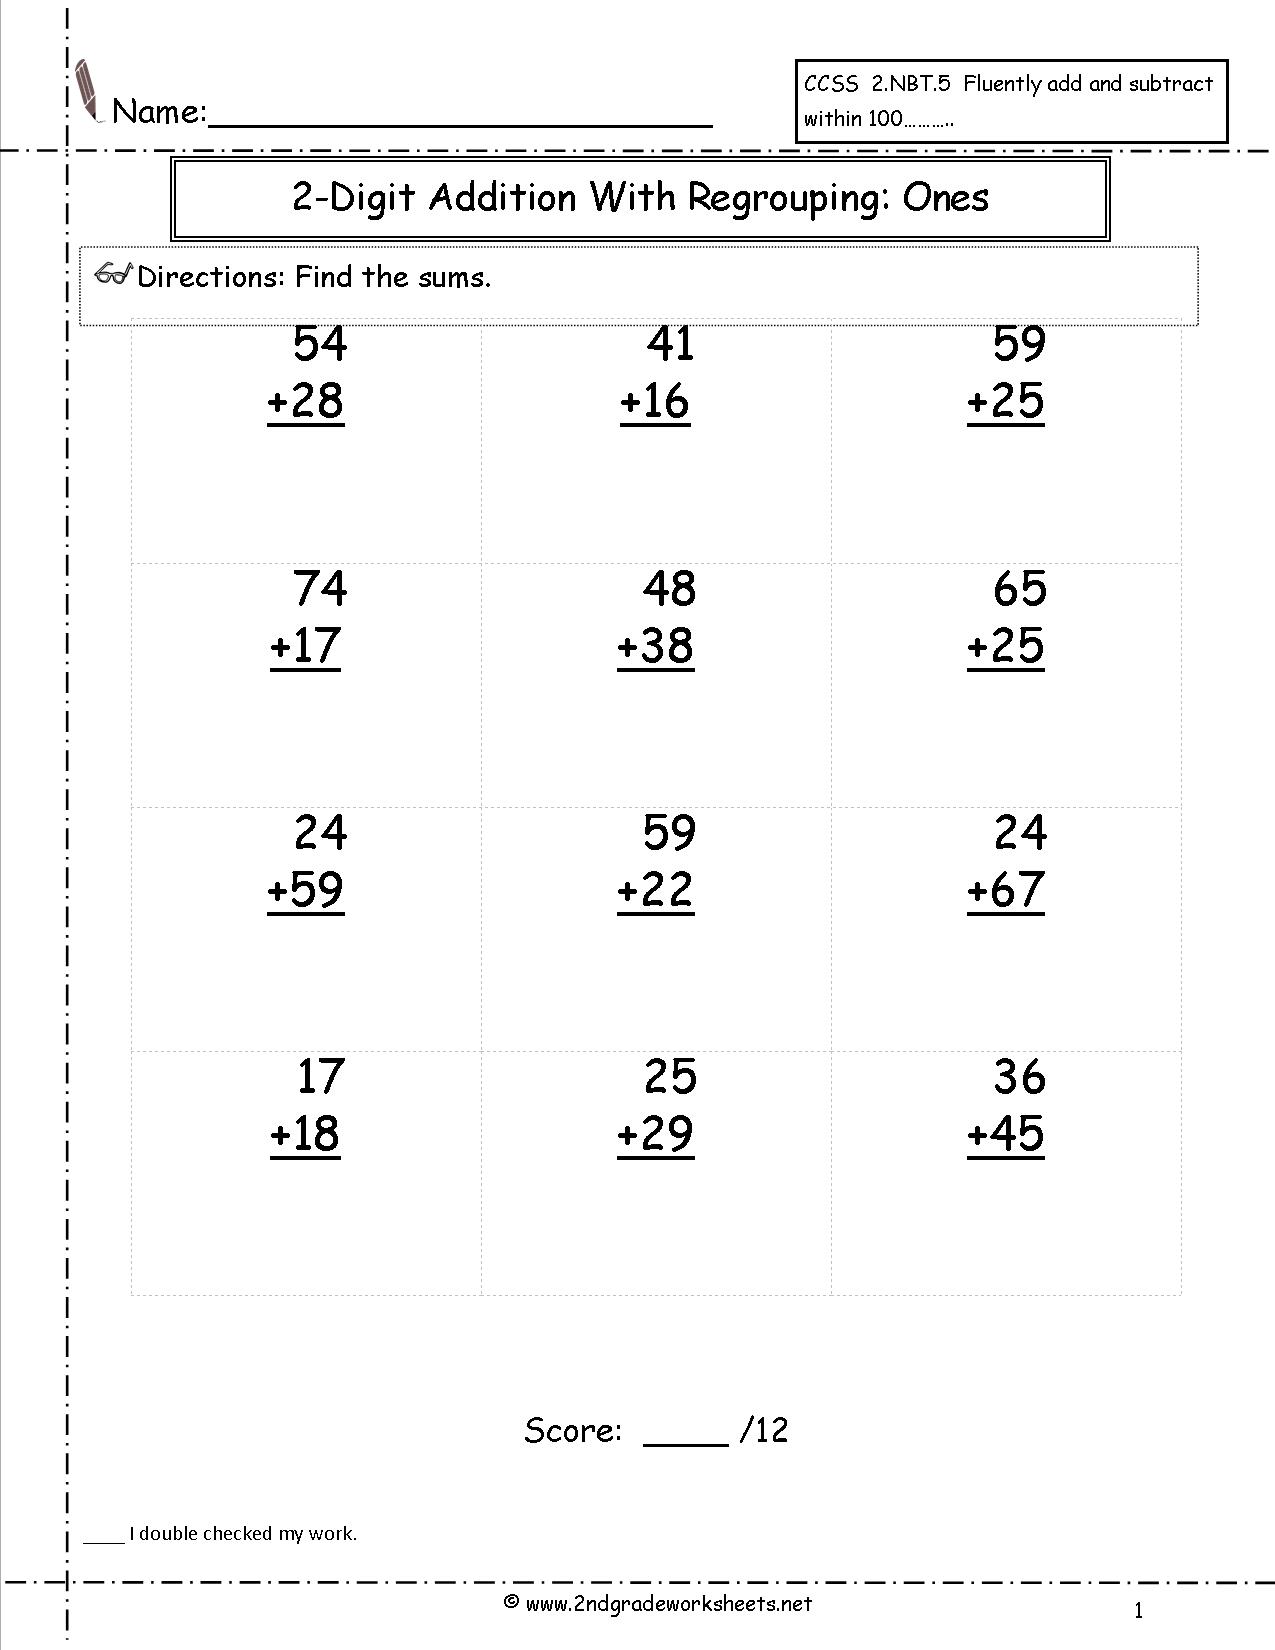 printable-2-digit-addition-with-regrouping